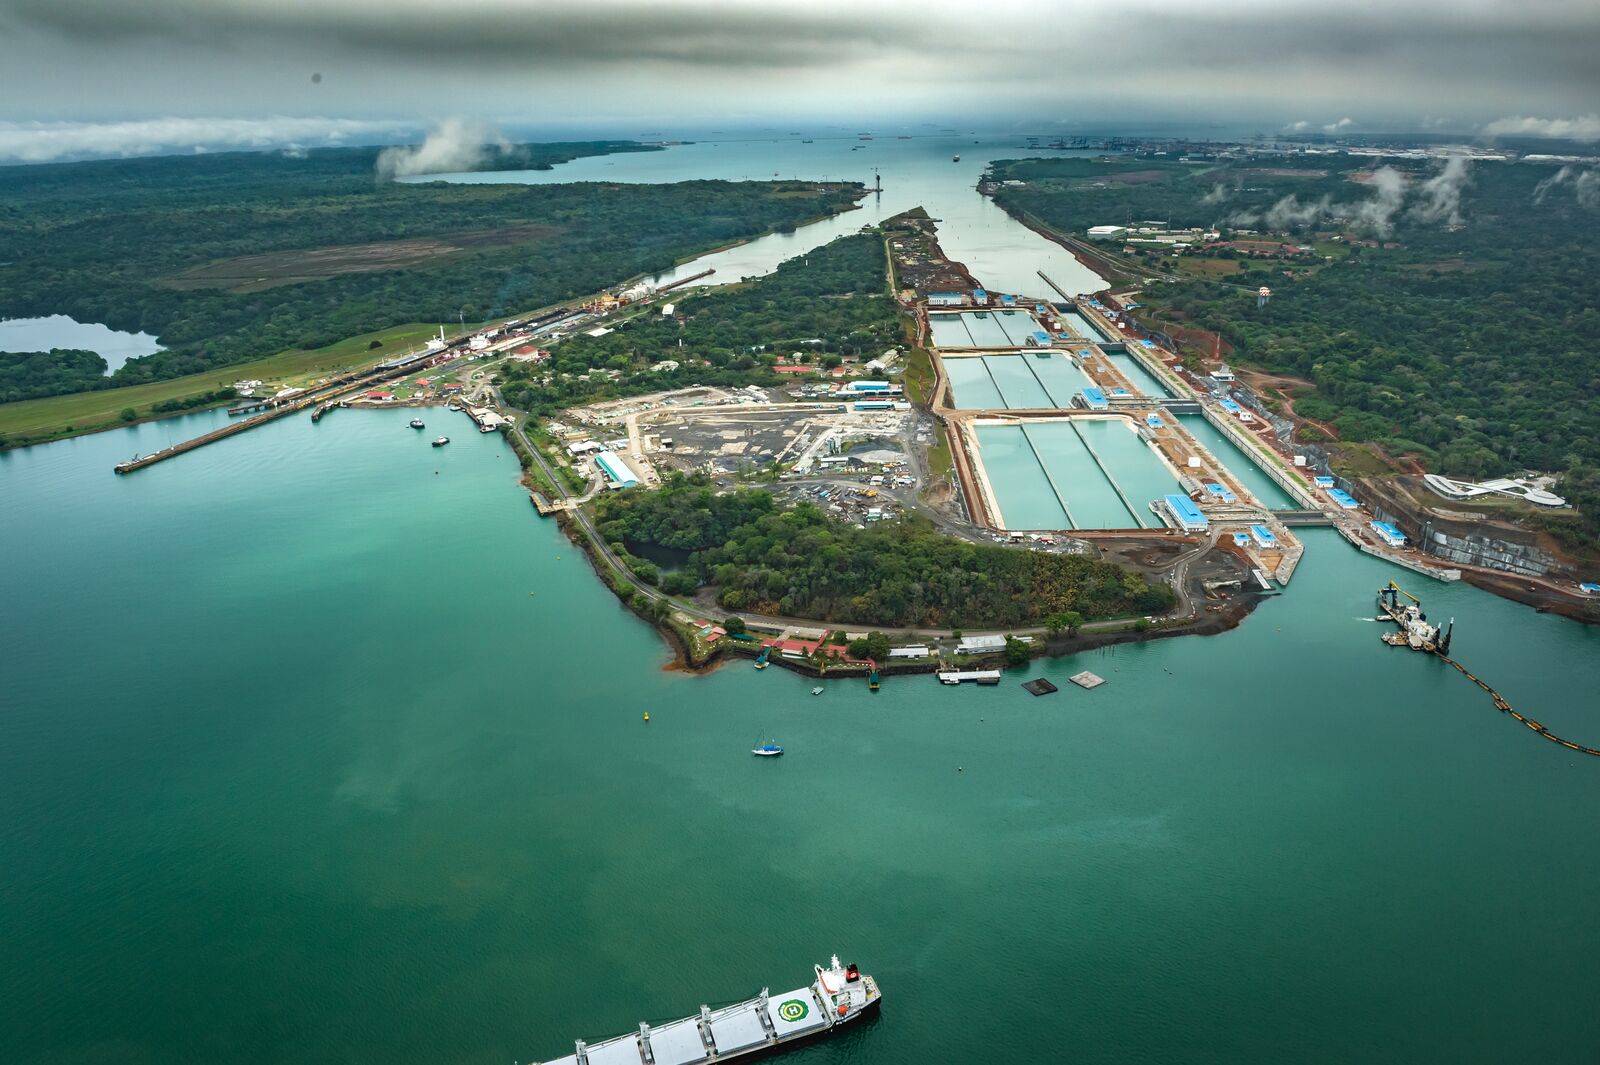 Helicopter Flight Over the Panama Canal